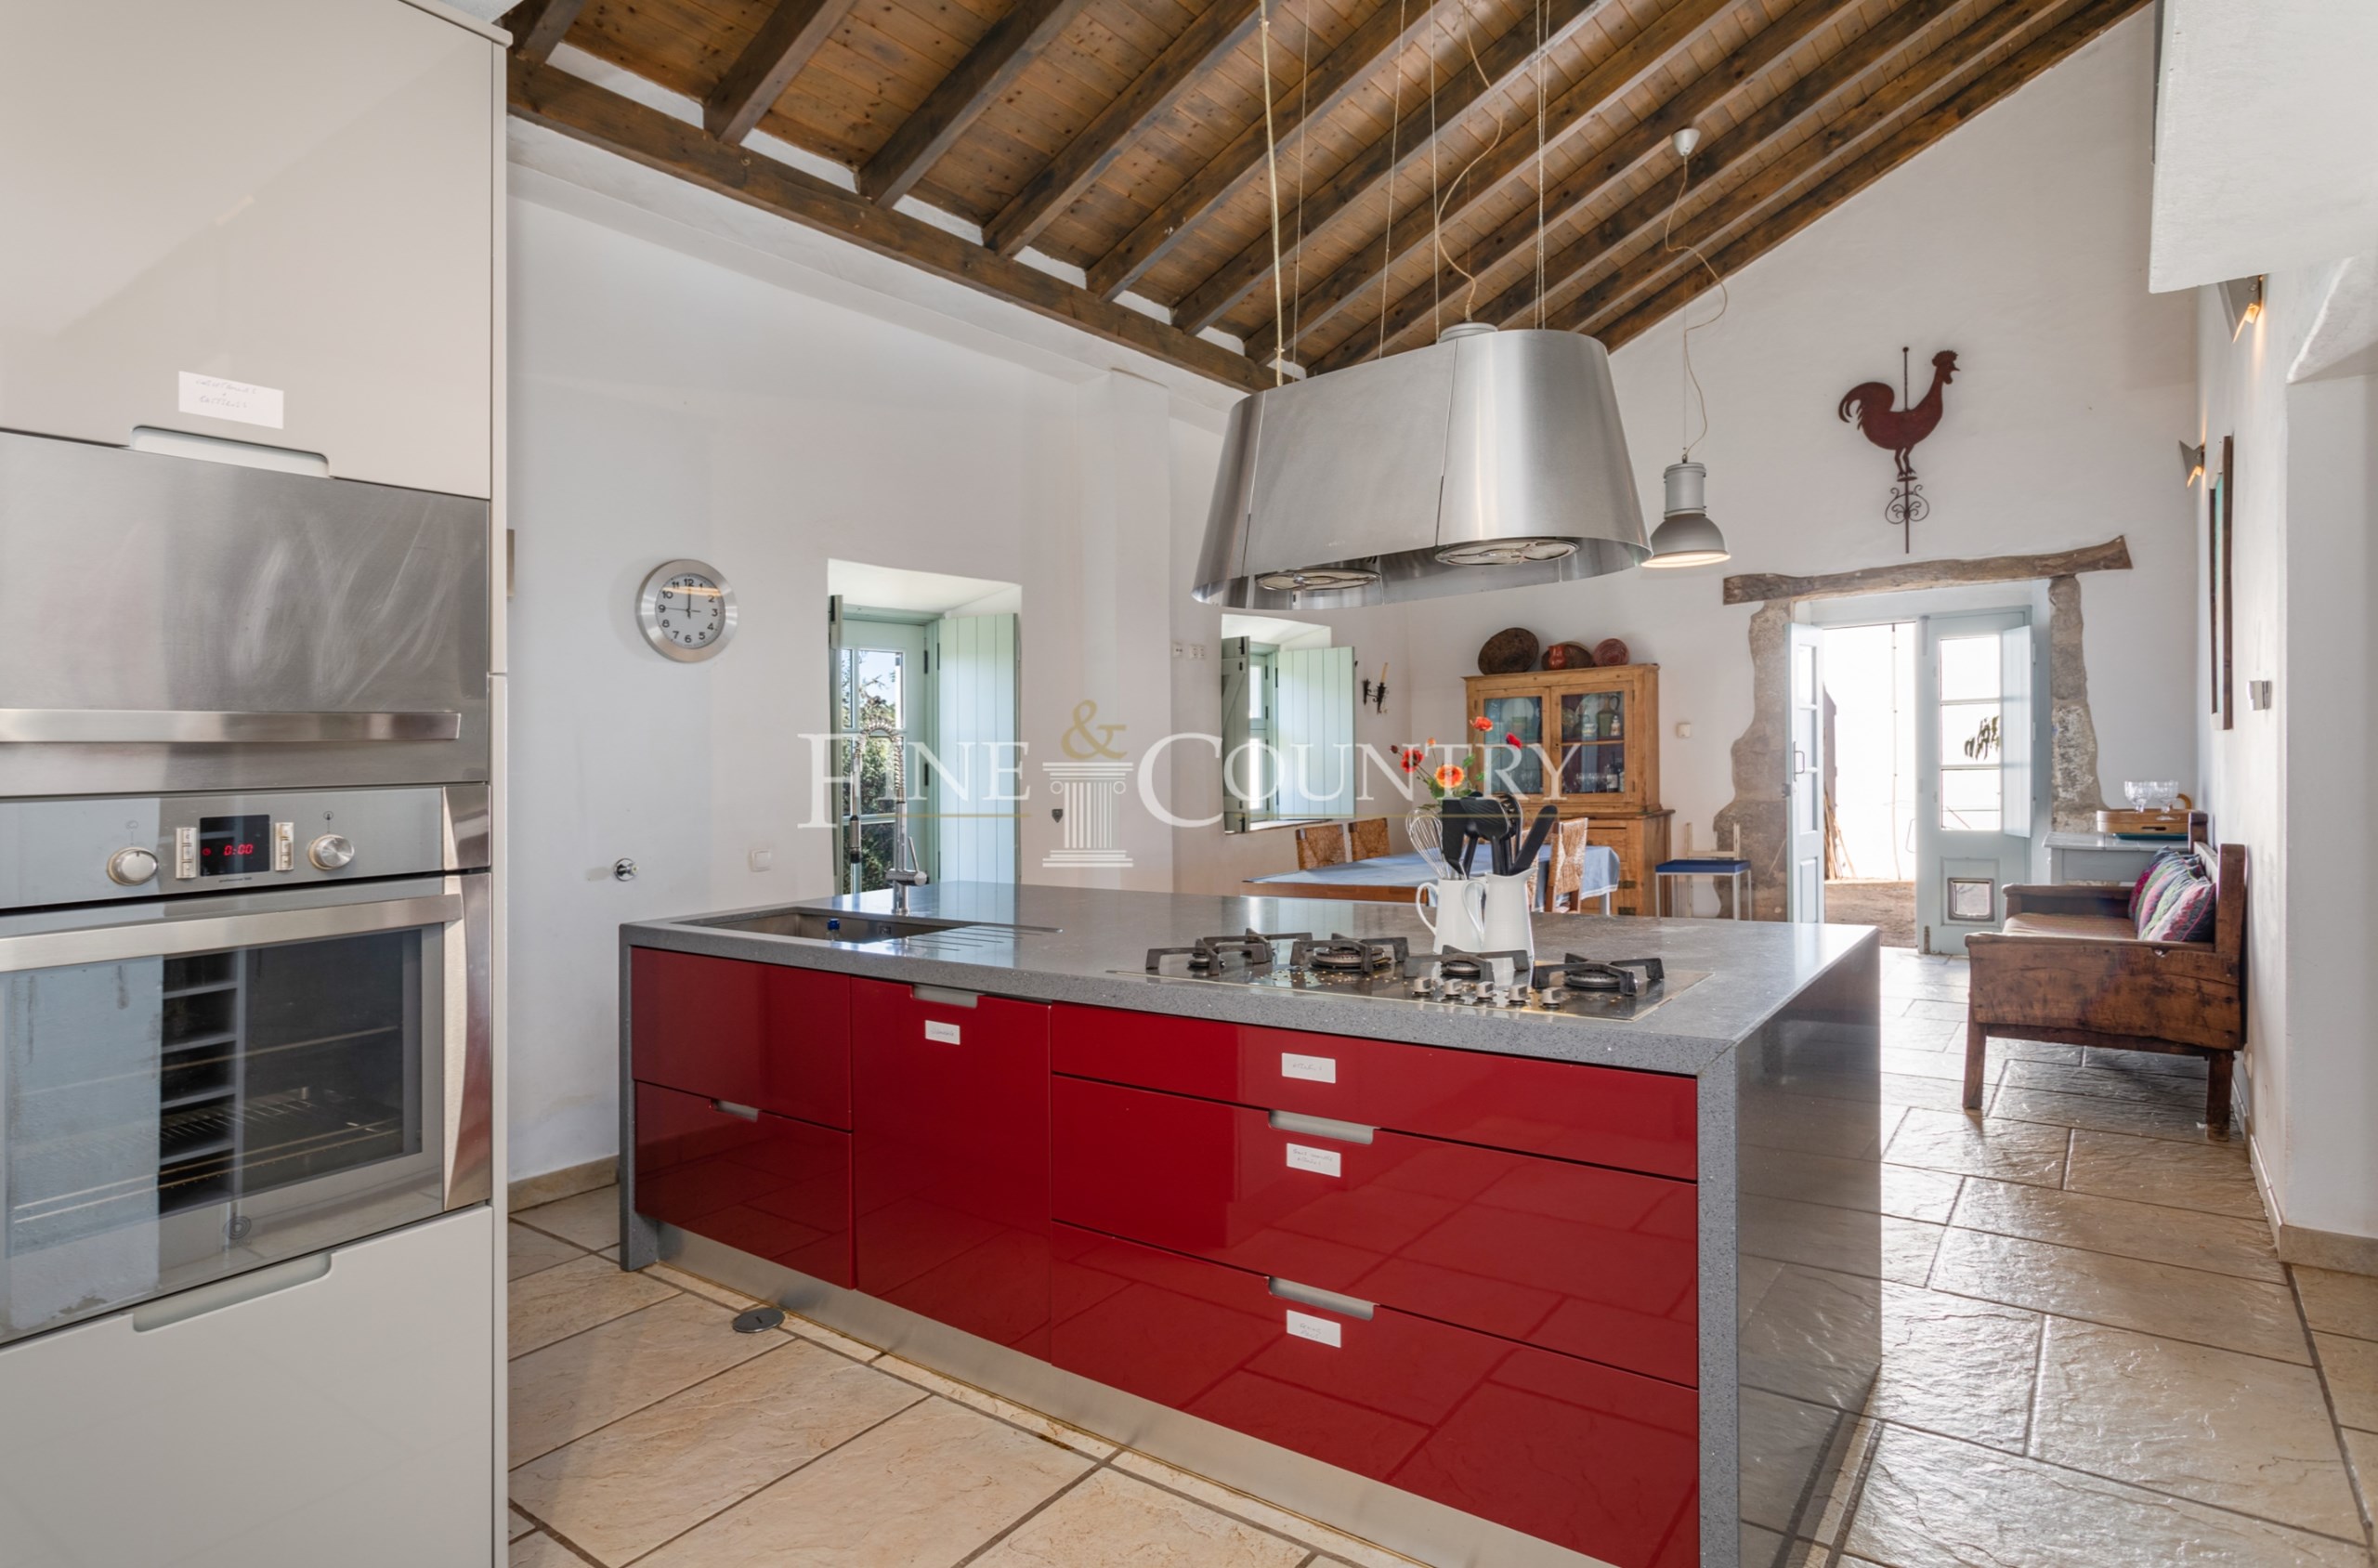 Photo of Tavira, charming character property in the countryside.